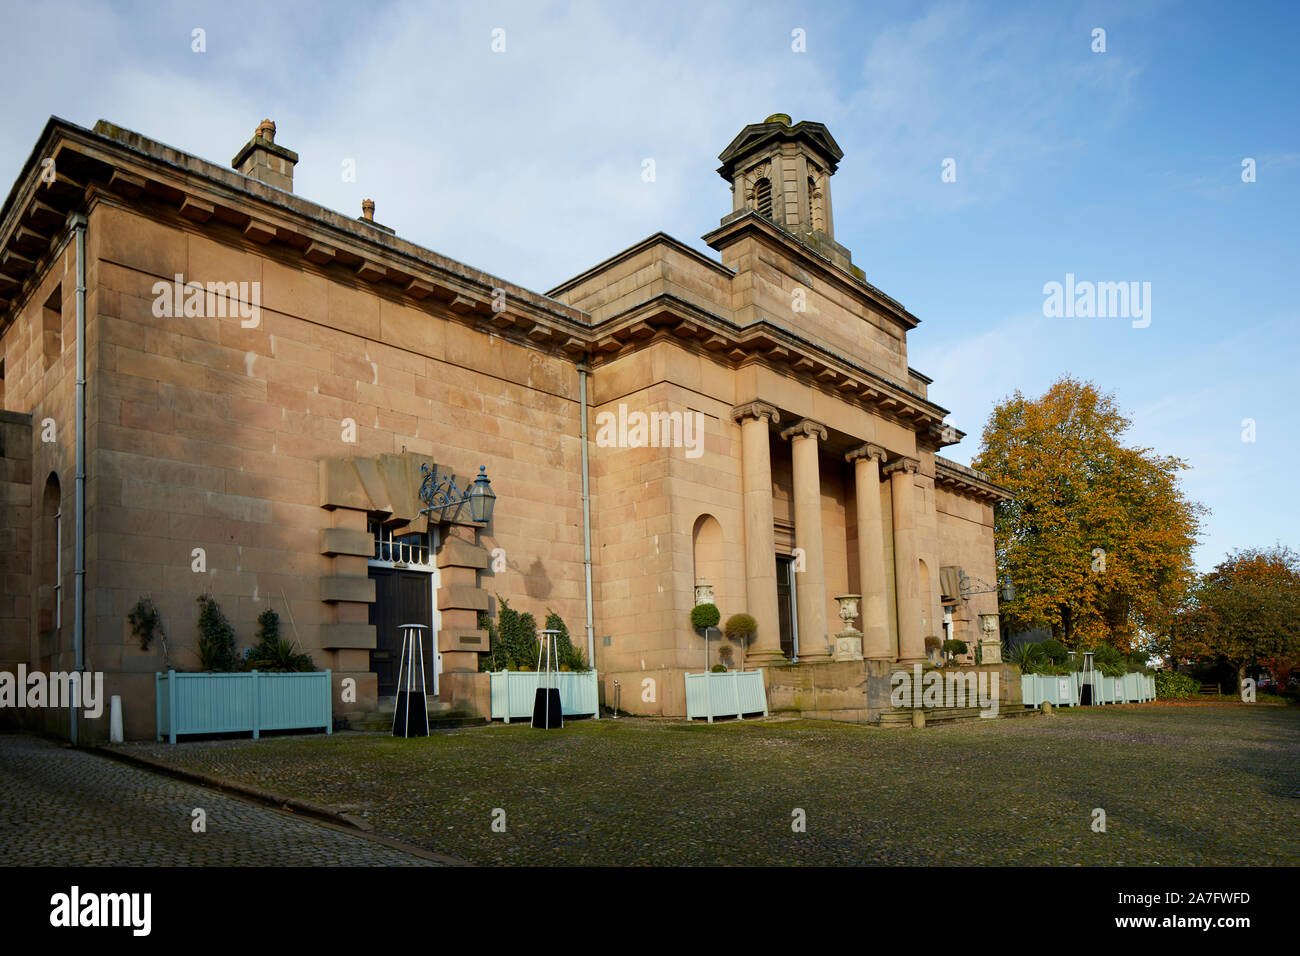 Knutsford town, Cheshire. The landmark Courthouse building on Toft Road, a former court building, Sessions House Designed by George MoneypennyII* in a Stock Photo